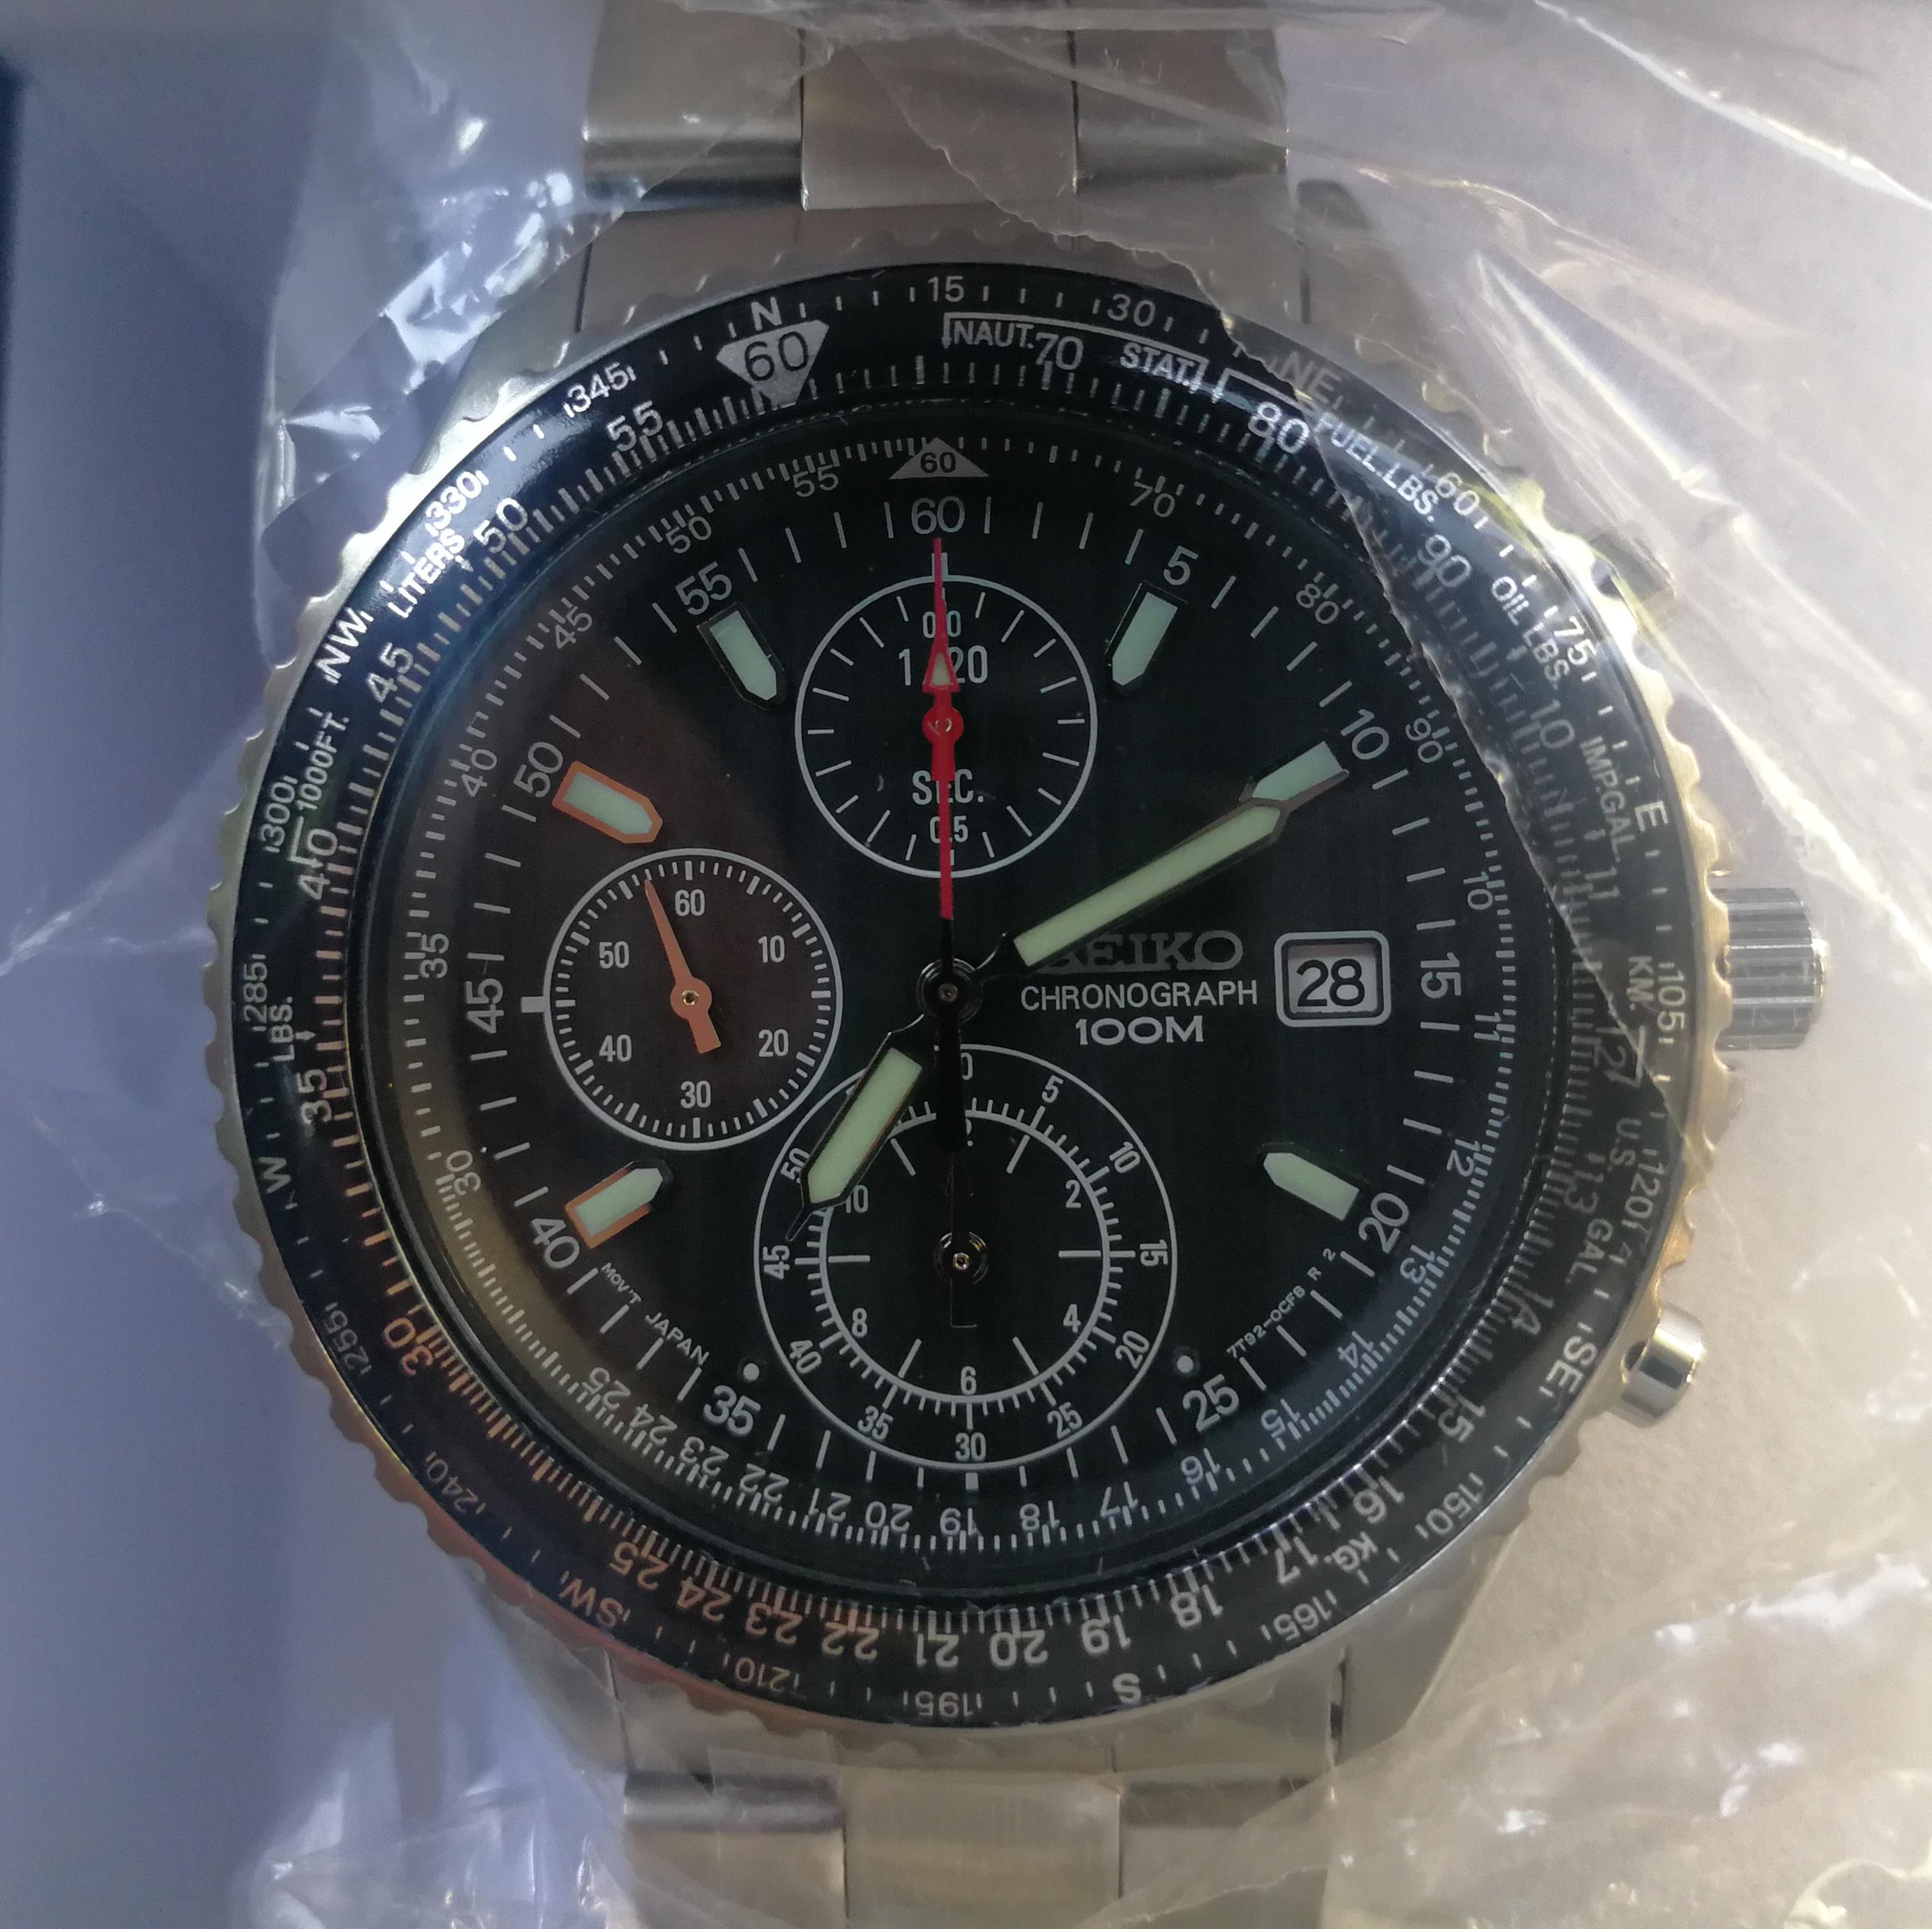 WTS] Seiko SND253P1, chrono w/slide rule, never out of box | WatchCharts